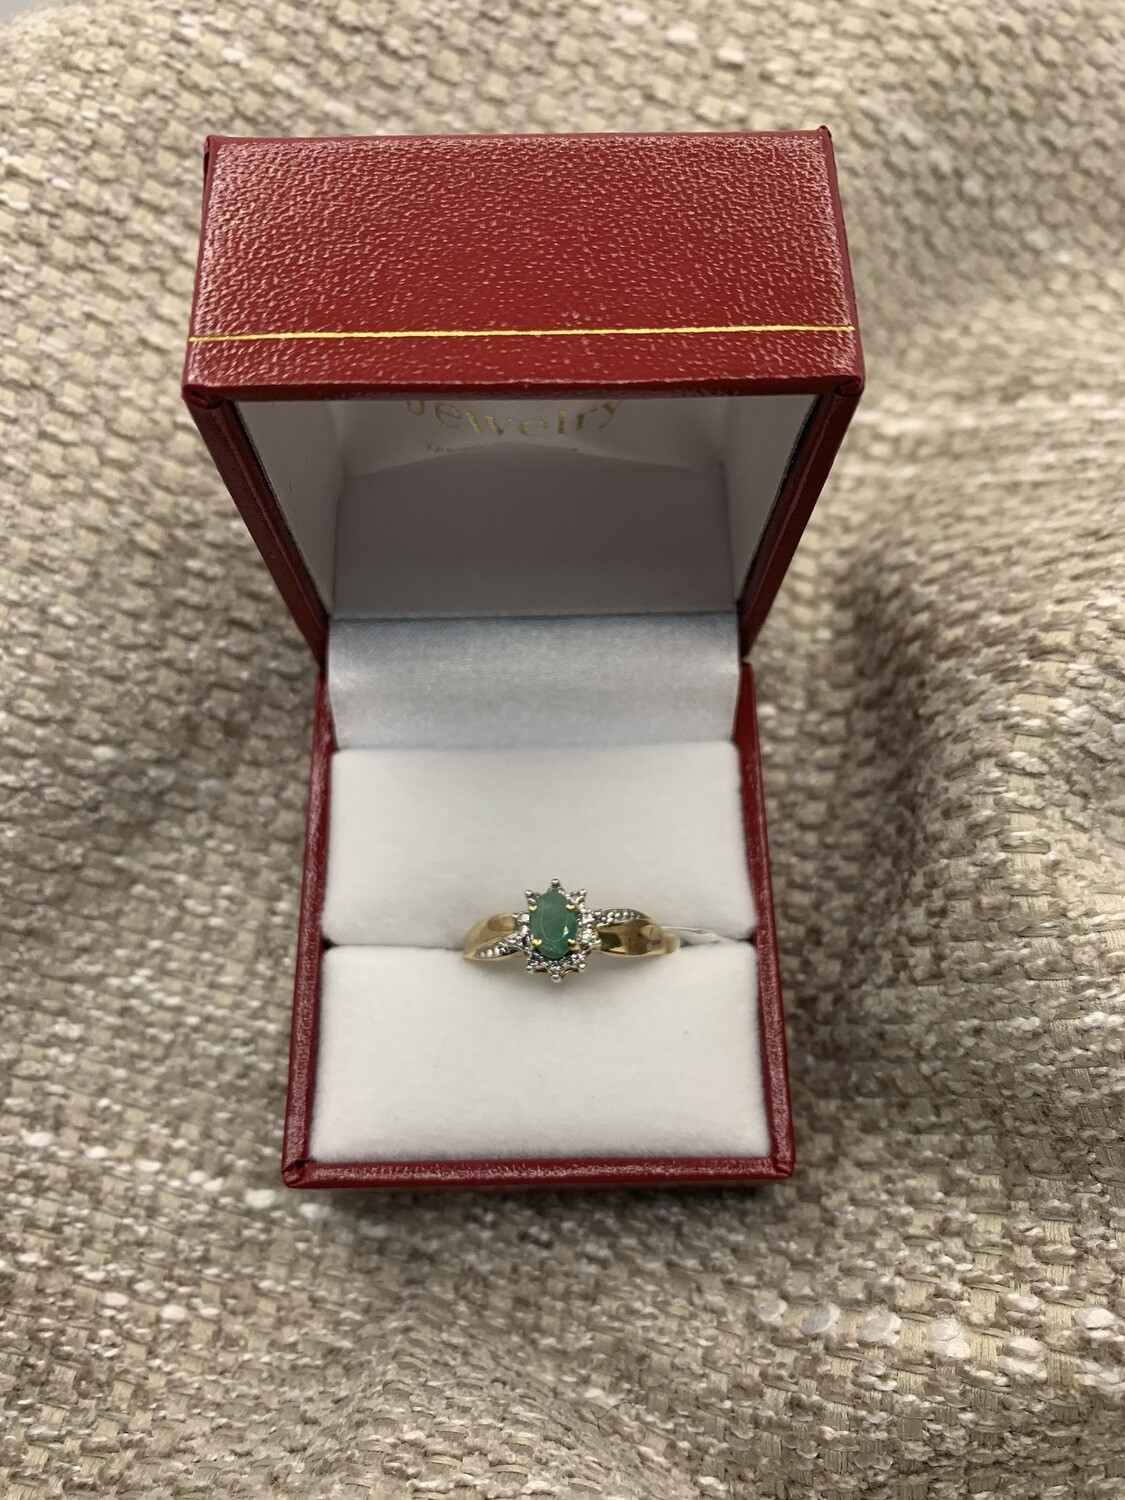 6mm X 4mm Genuine Emerald And Diamond Ring set in 10K Yellow Gold